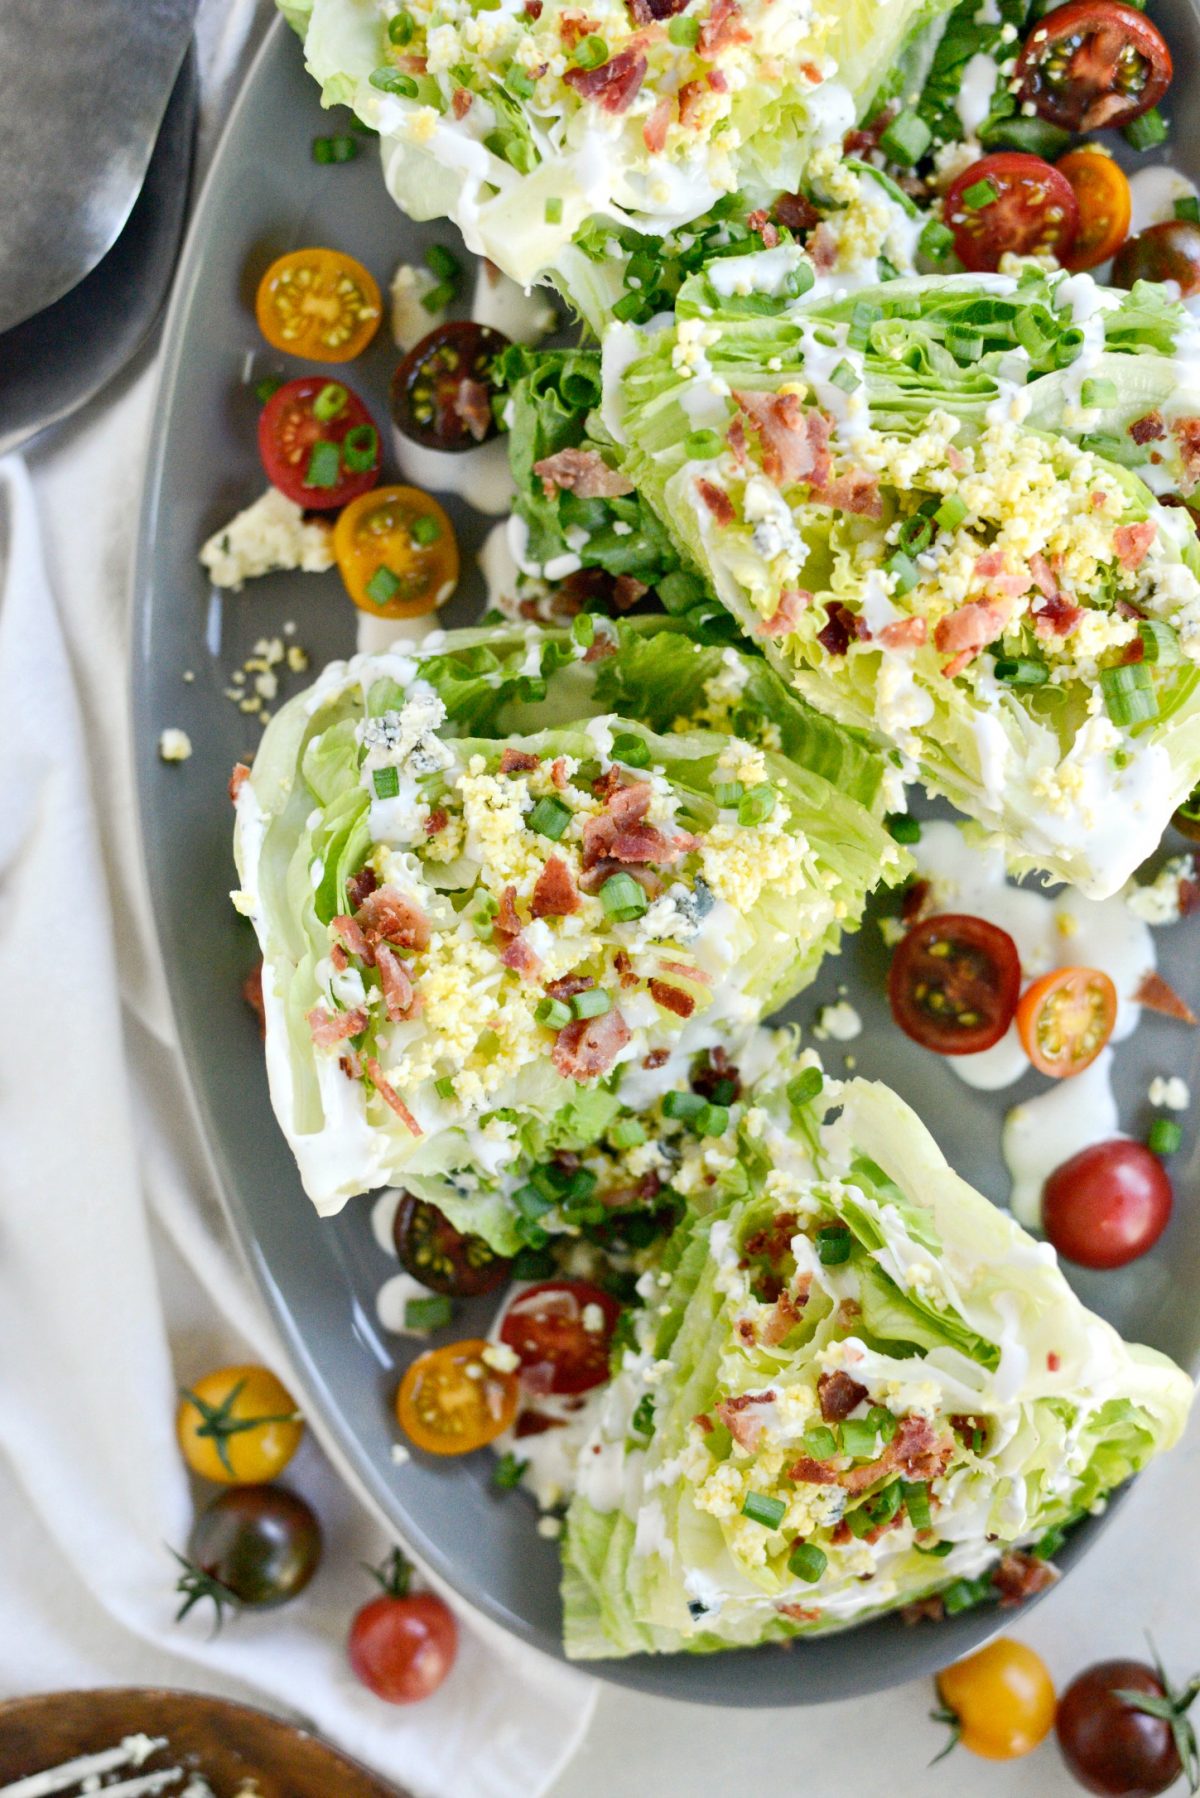 Loaded Wedge Salad with Black Pepper Buttermilk Dressing